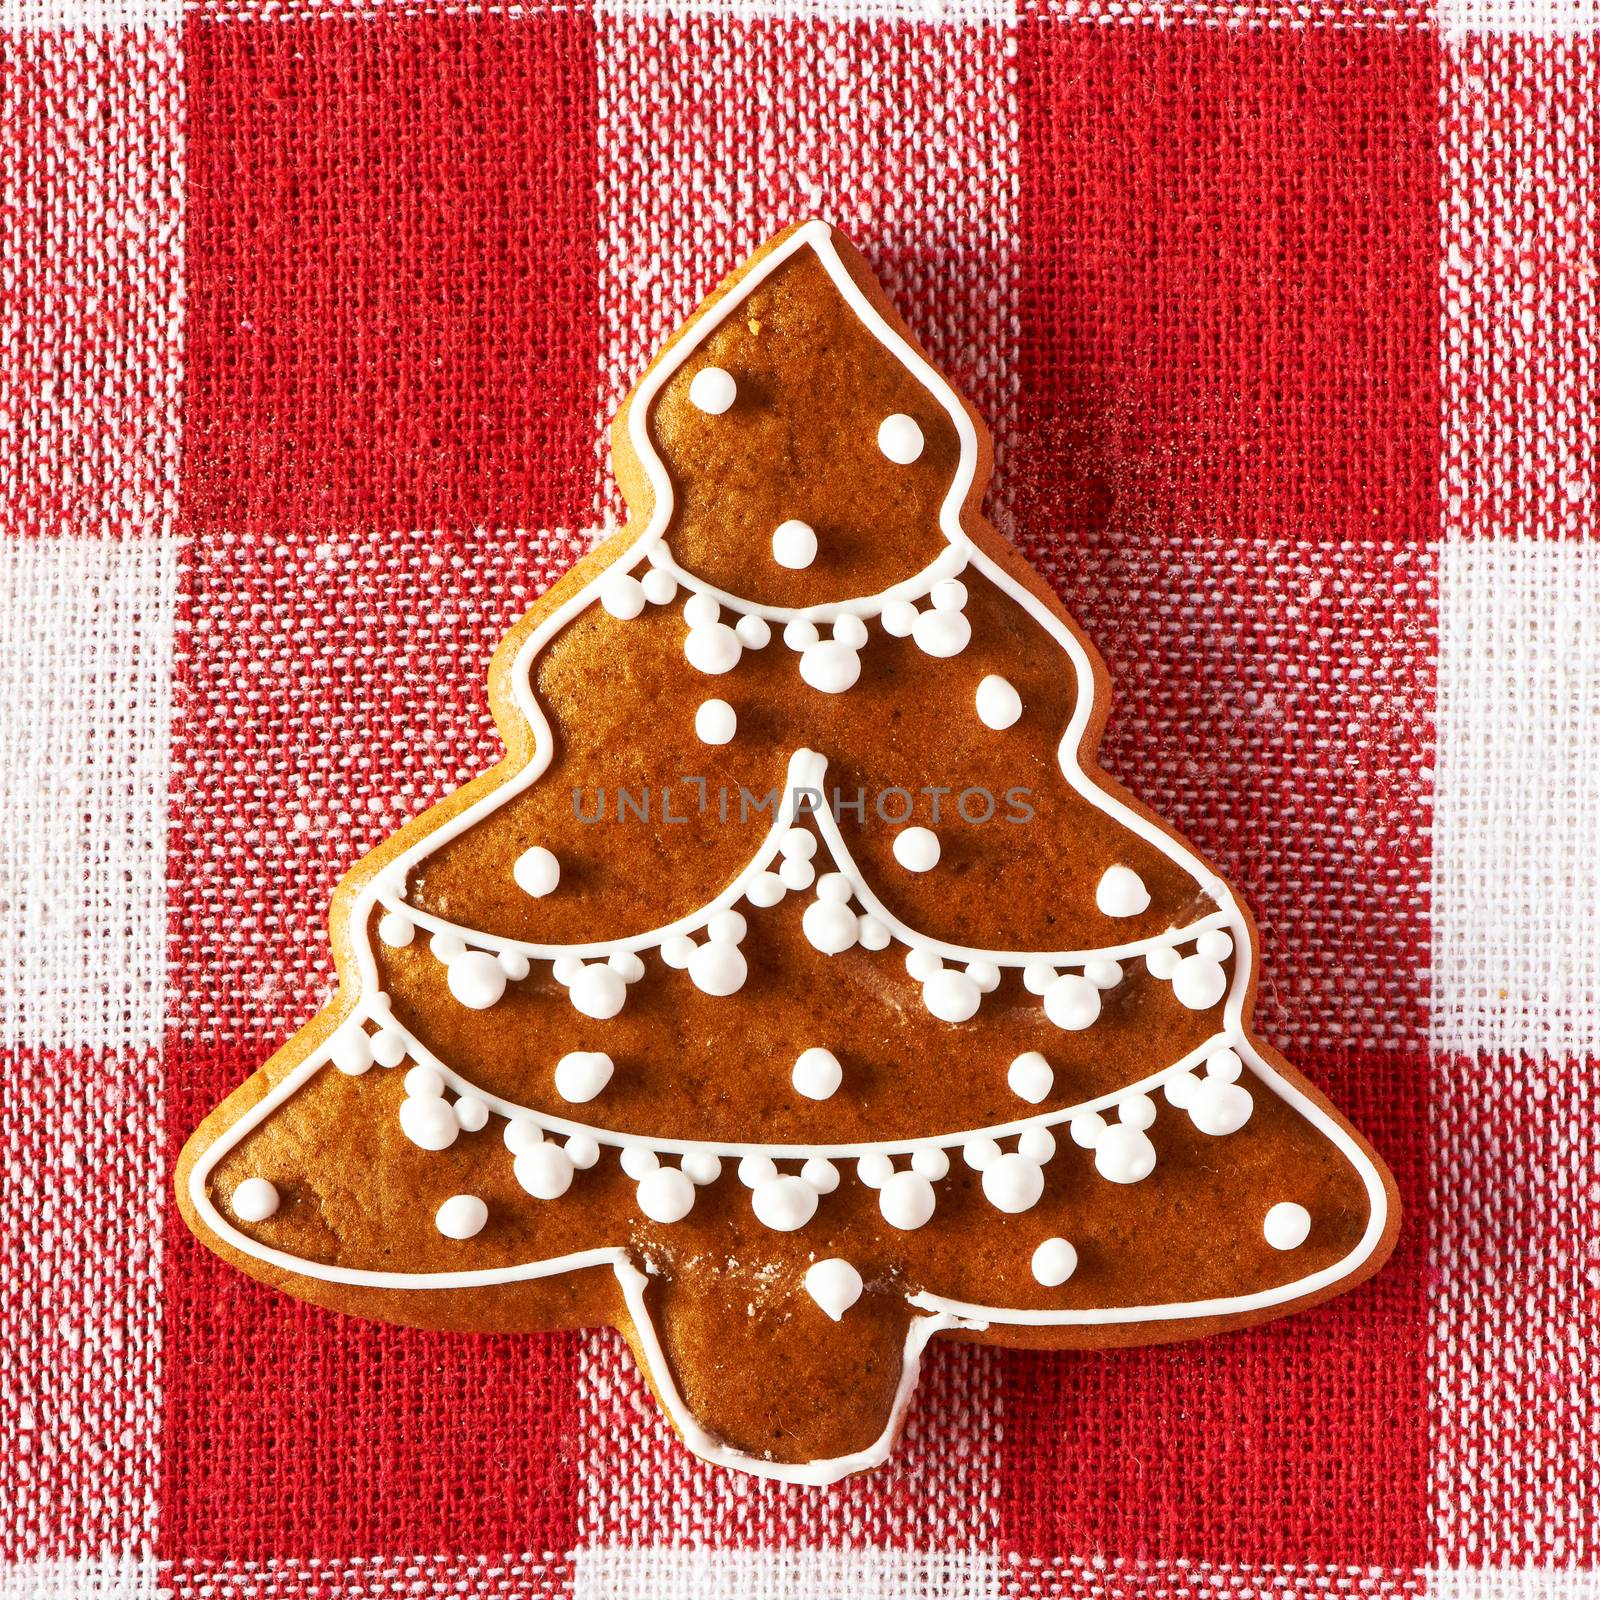 Christmas homemade gingerbread cookie by haveseen